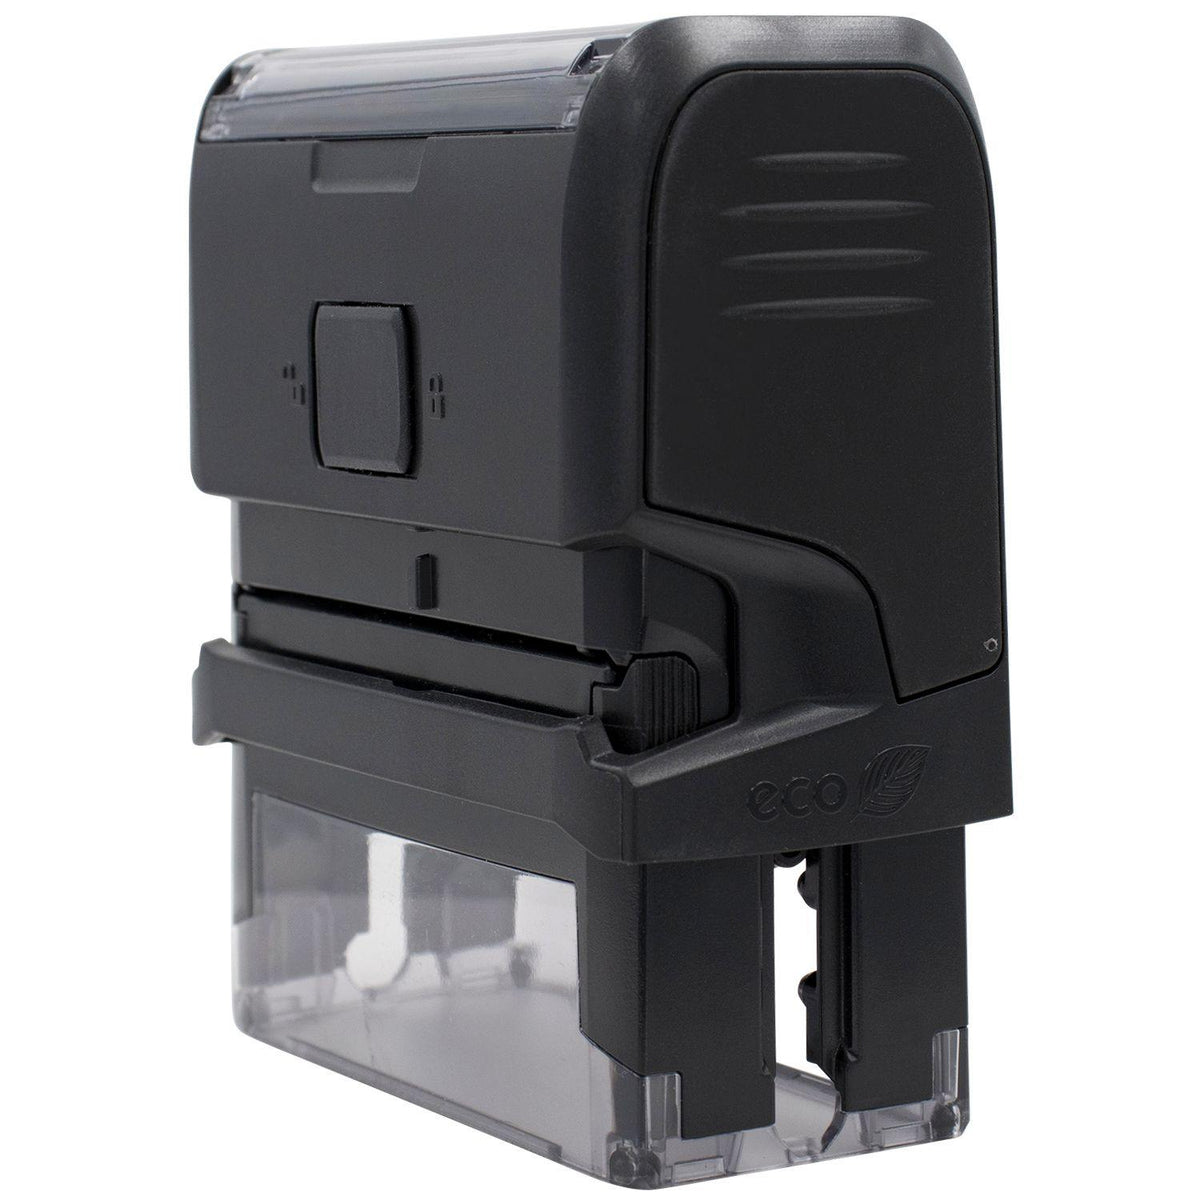 Self-Inking Cursive Draft Stamp - Engineer Seal Stamps - Brand_Trodat, Impression Size_Small, Stamp Type_Self-Inking Stamp, Type of Use_General, Type of Use_Office